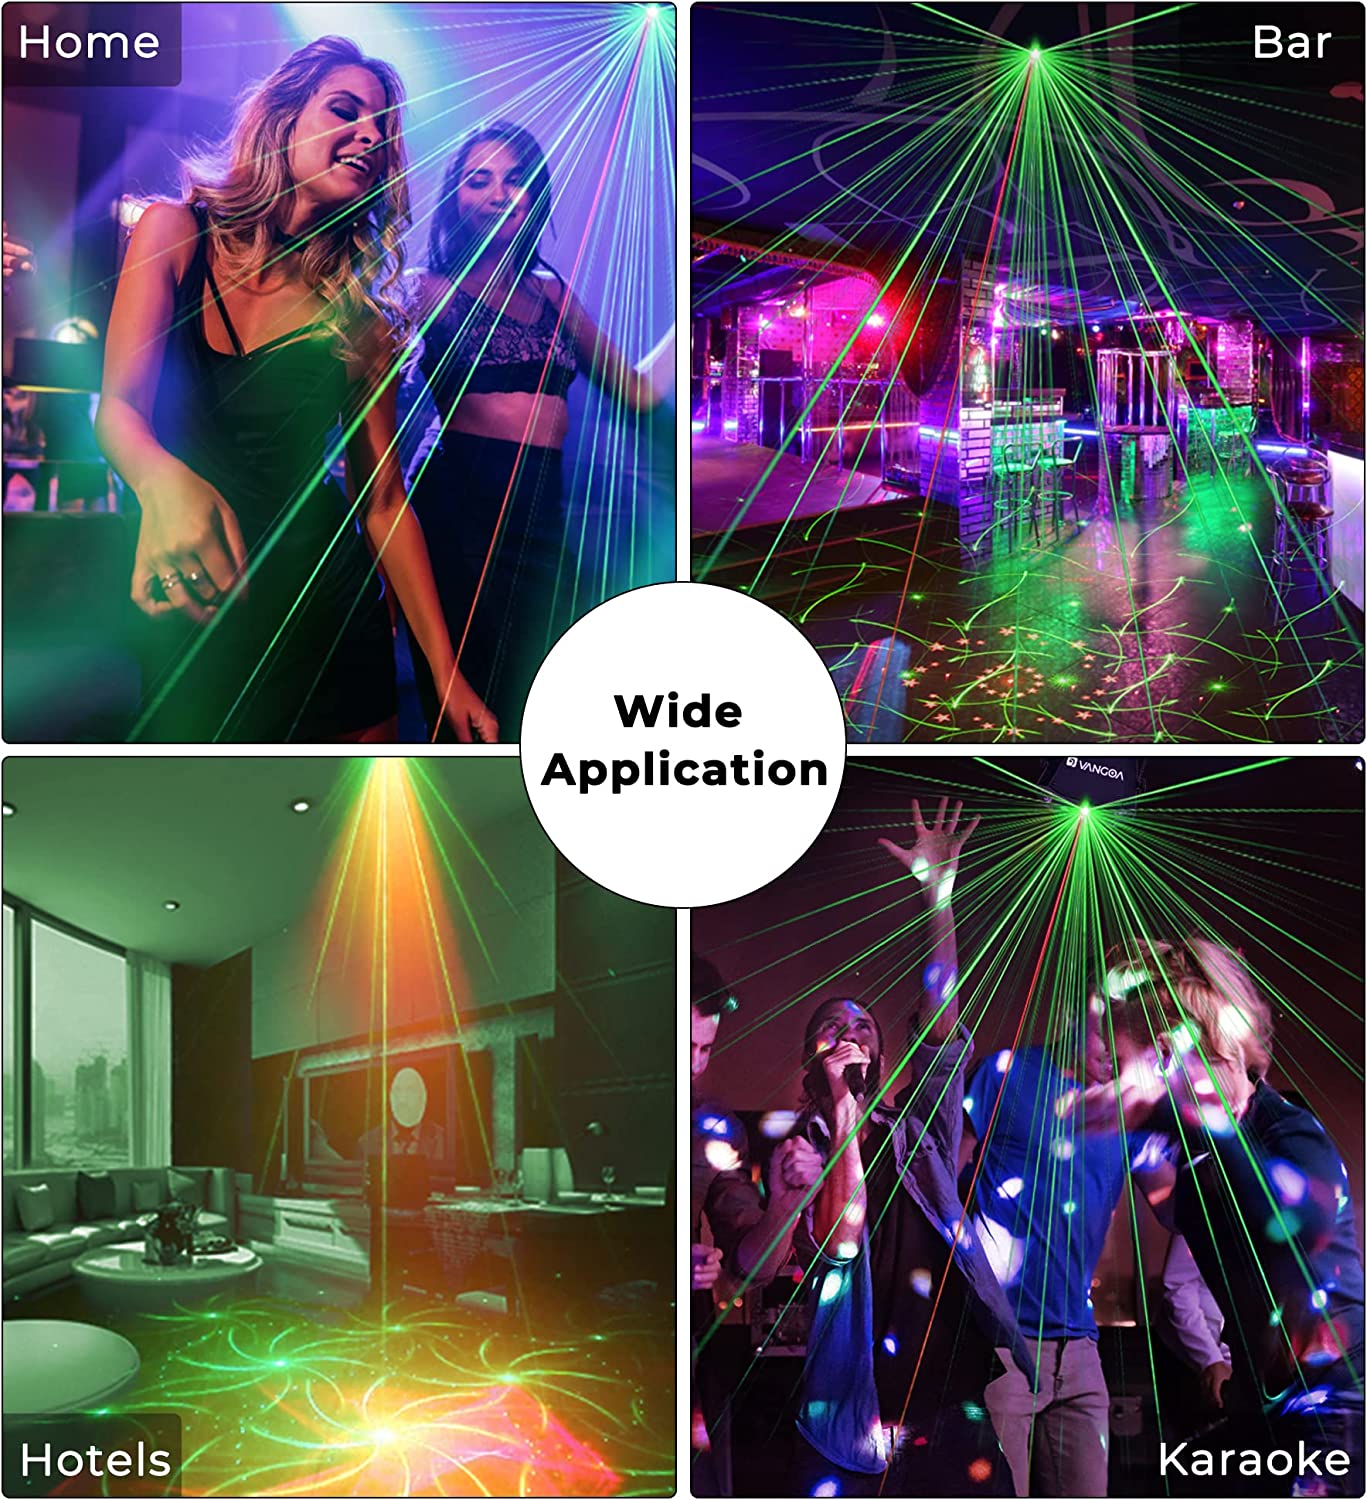 🇺🇸]Vangoa YSH401 2 in 1 Portable Stage Party Lights Sound Activated U